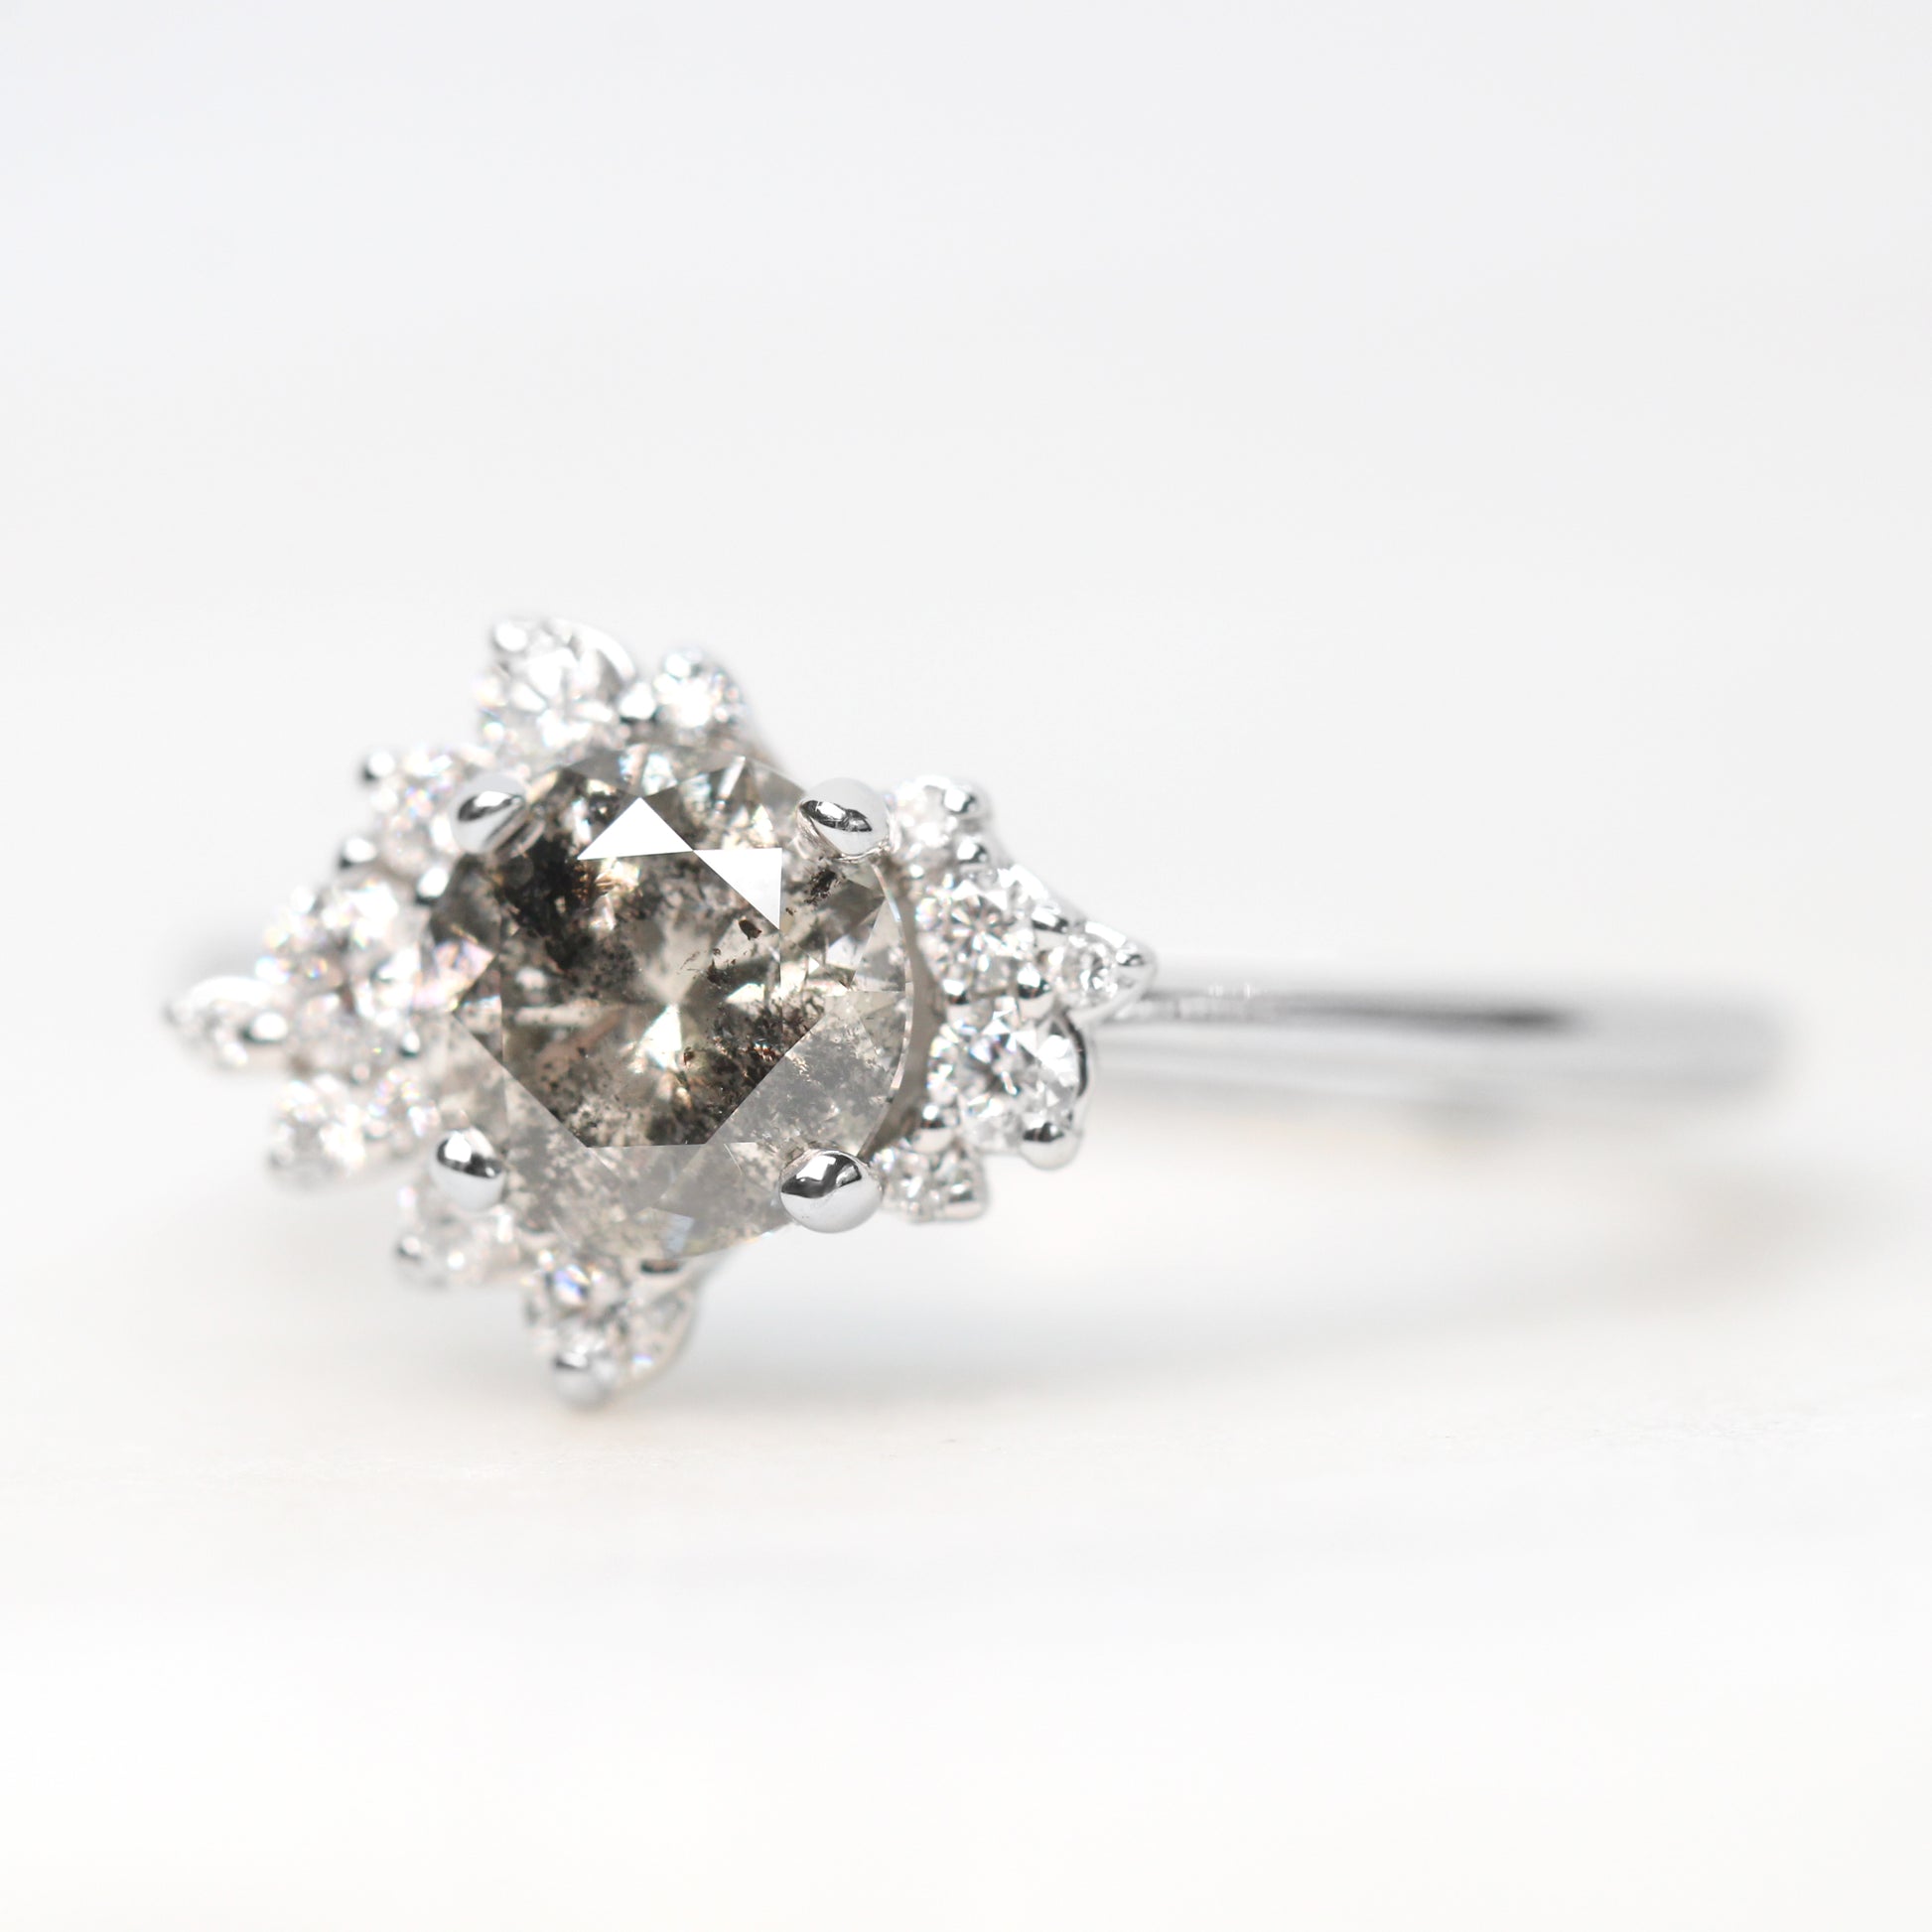 Orion Ring with a 1.00 Carat Round Dark Gray Celestial Diamond and White Accent Diamonds in 14k White Gold - Ready to Size and Ship - Midwinter Co. Alternative Bridal Rings and Modern Fine Jewelry